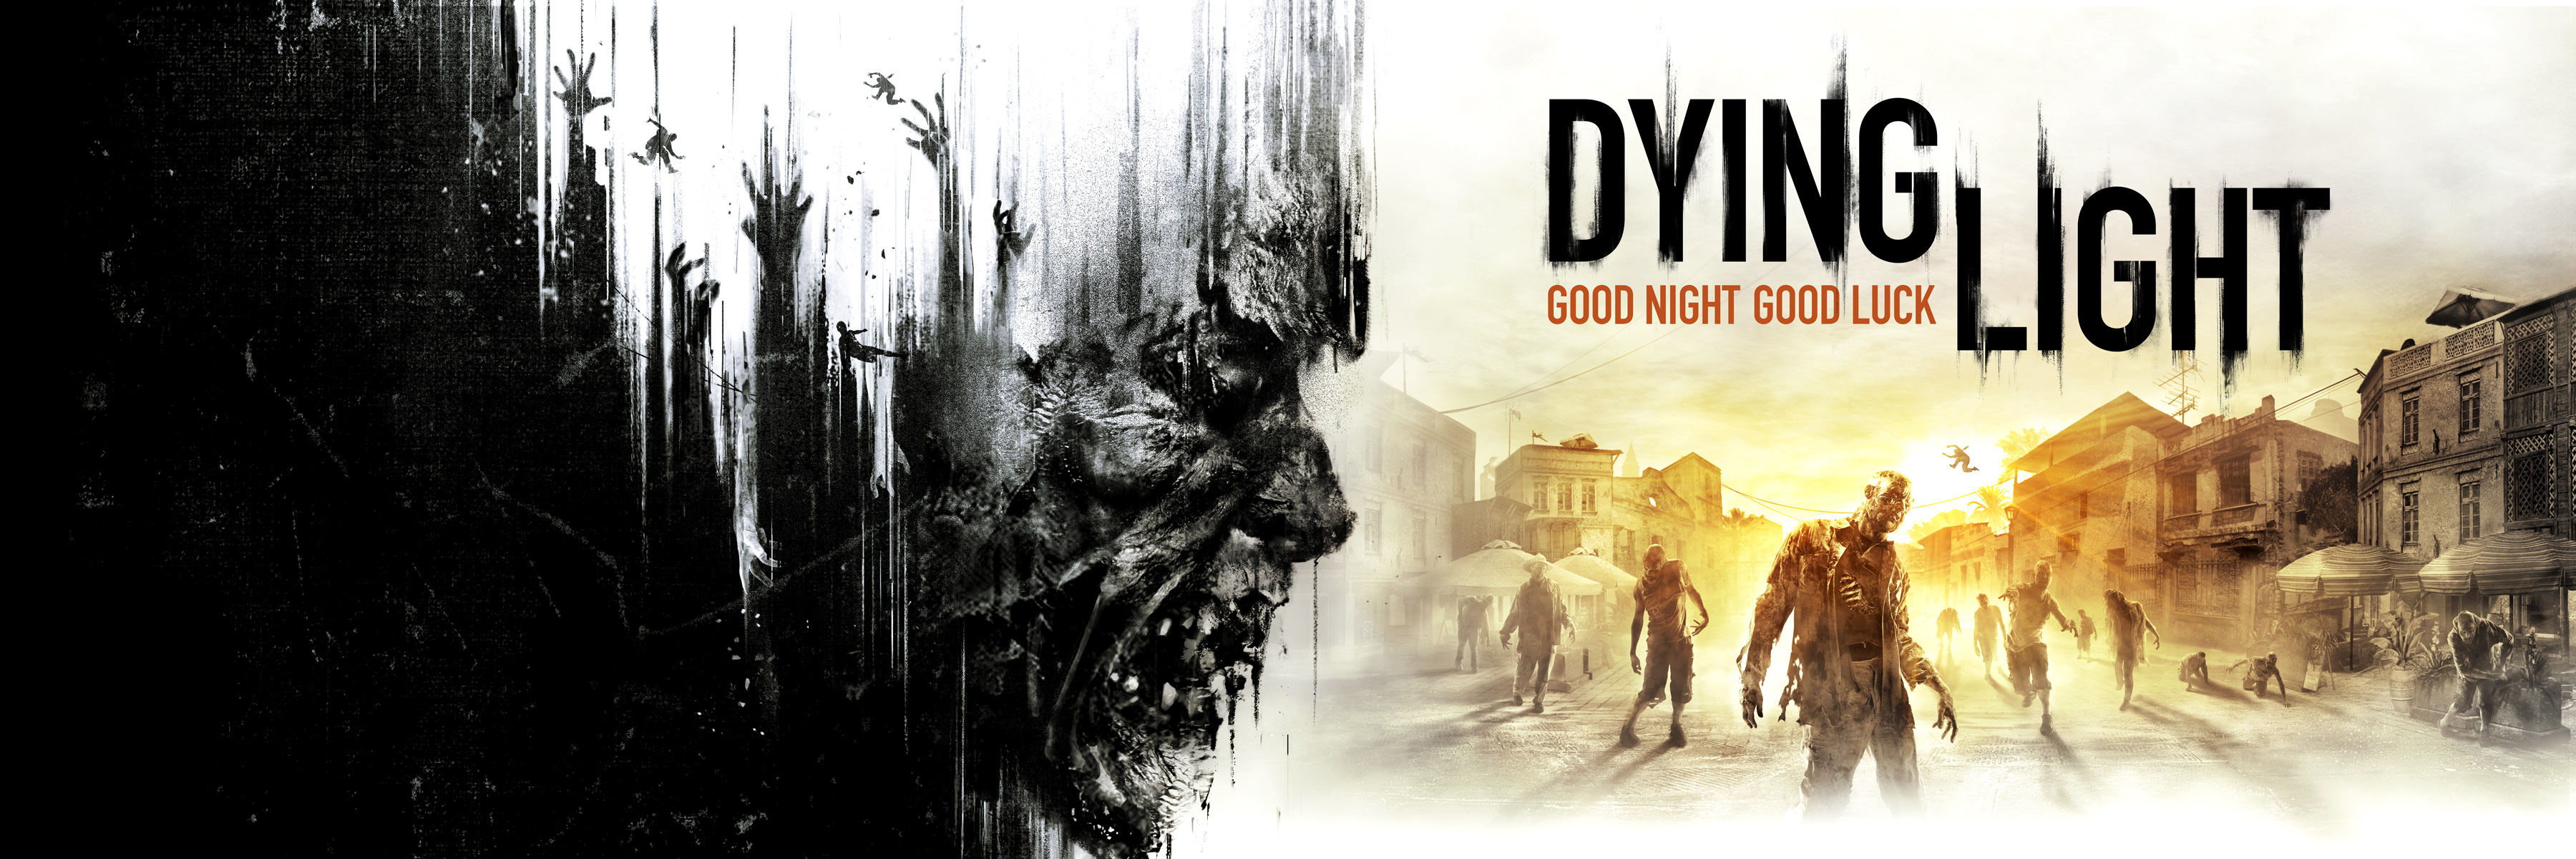 dying light wallpaper,text,album cover,font,action adventure game,adaptation